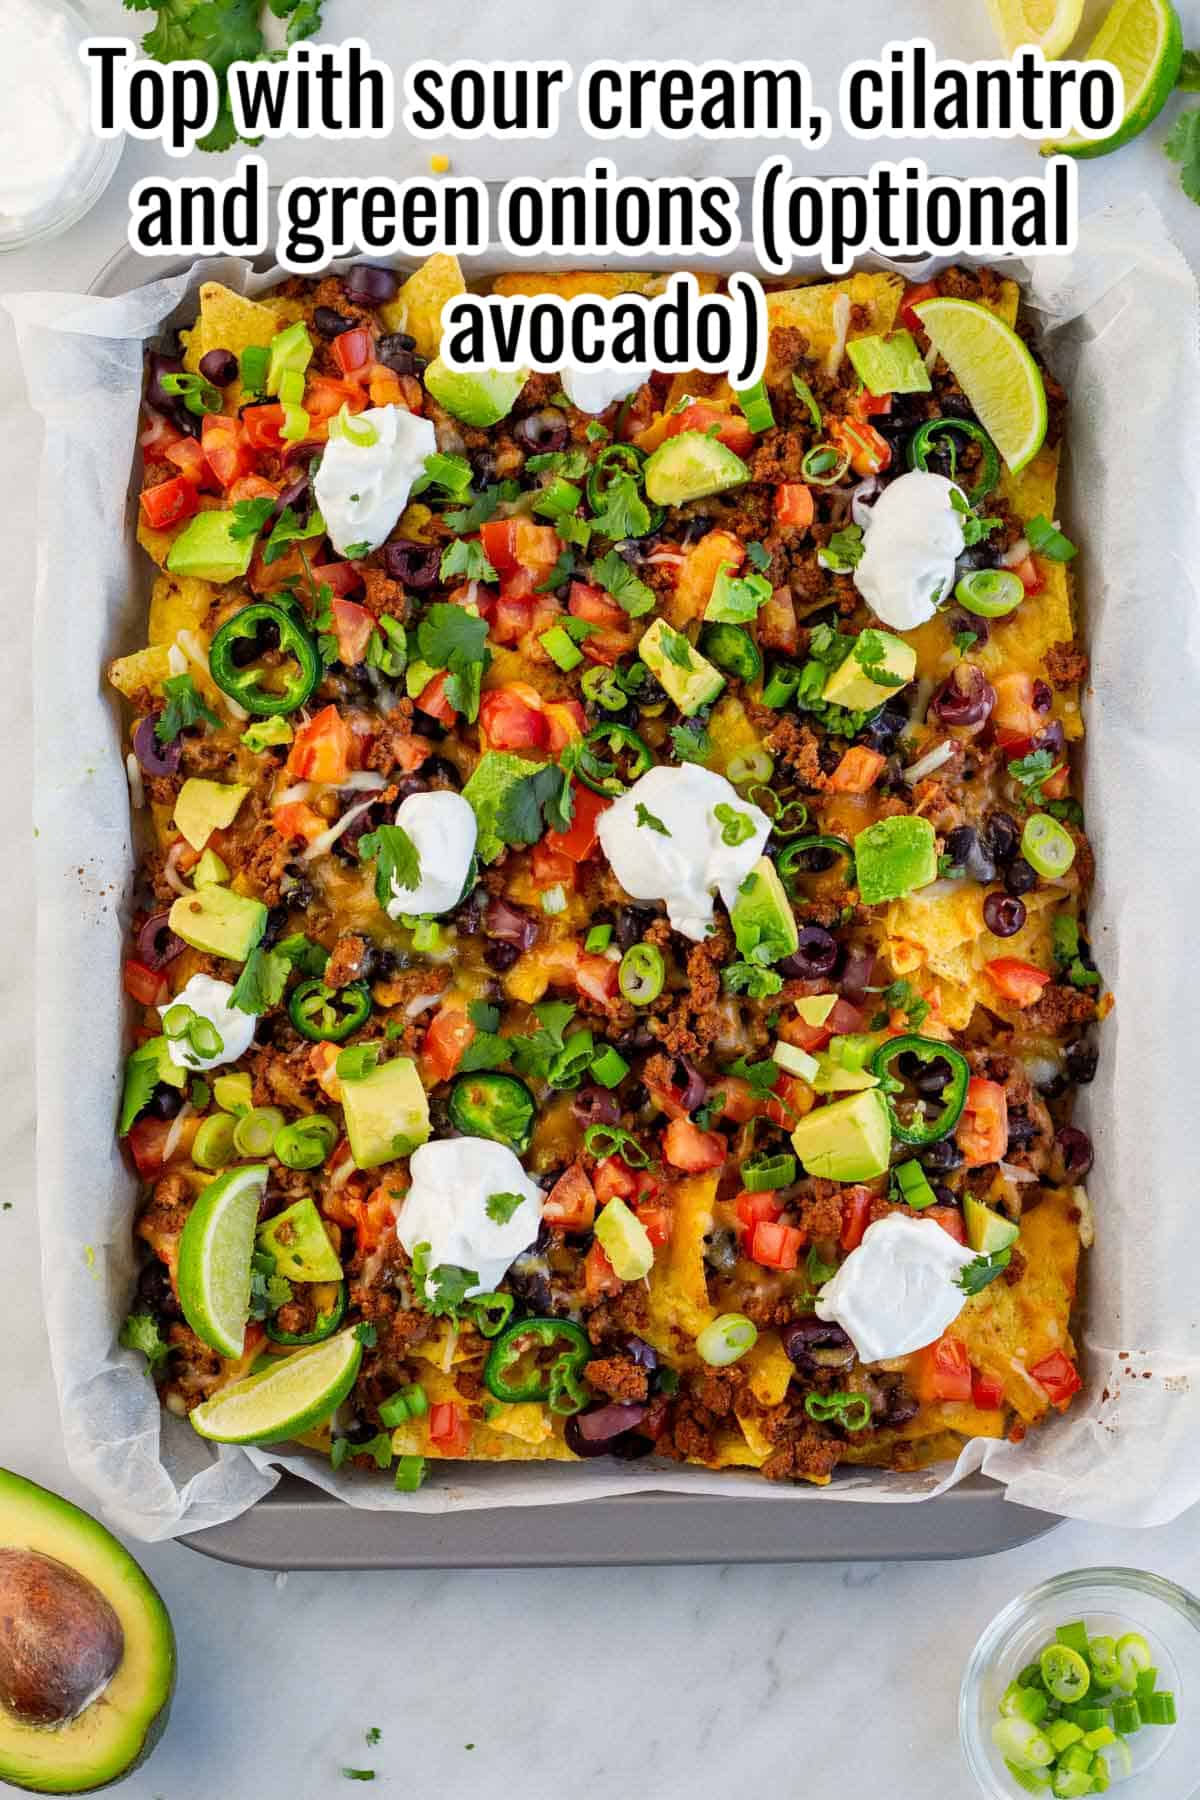 baked nachos with sour cream, onions and avocado added.